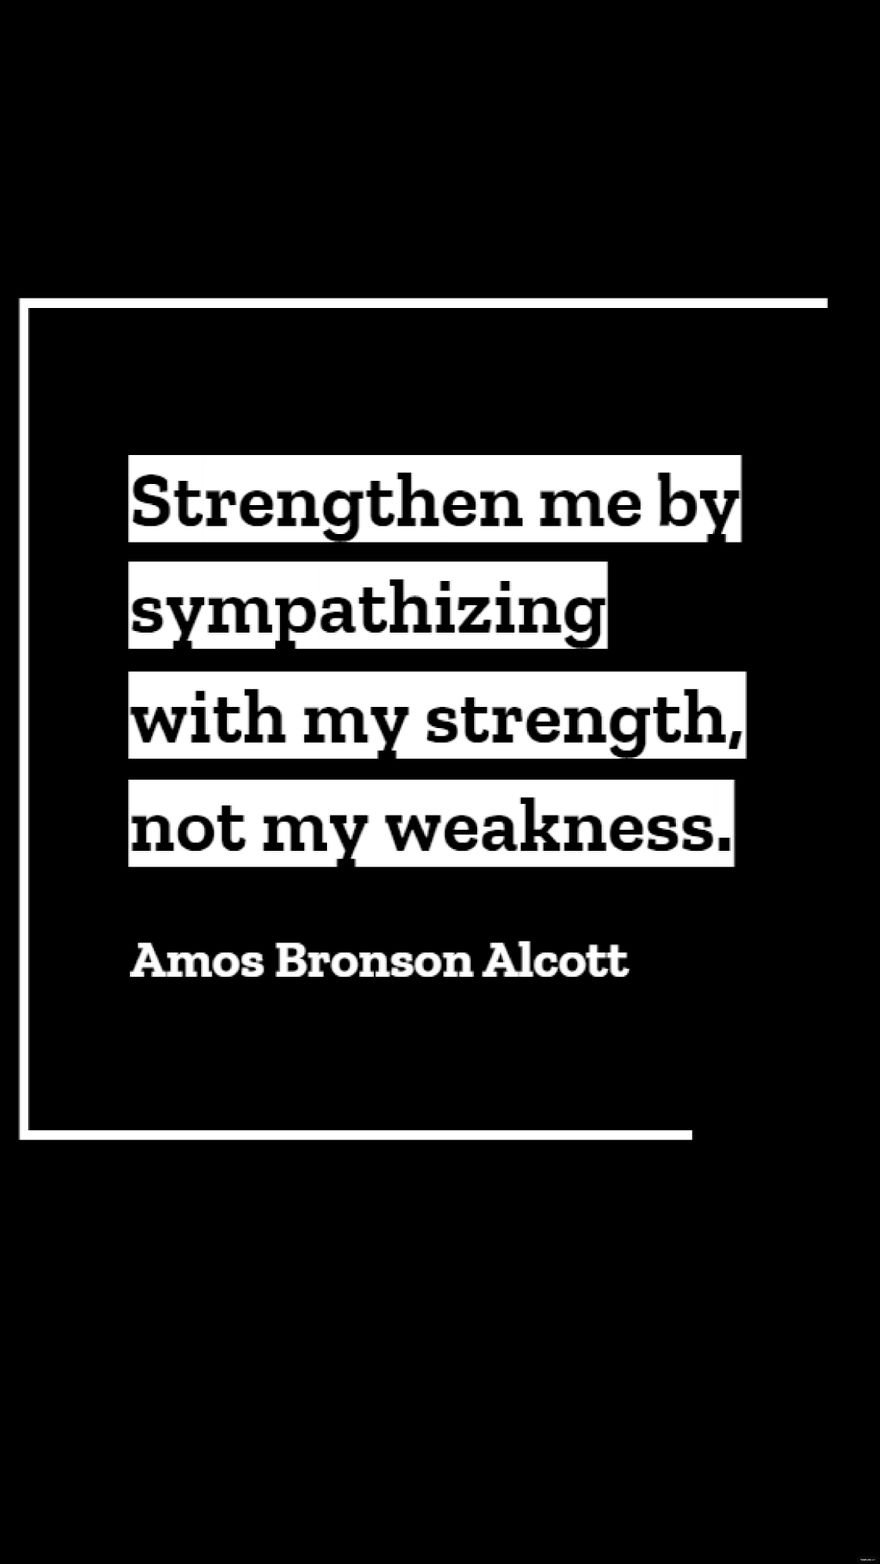 Amos Bronson Alcott - Strengthen me by sympathizing with my strength, not my weakness.